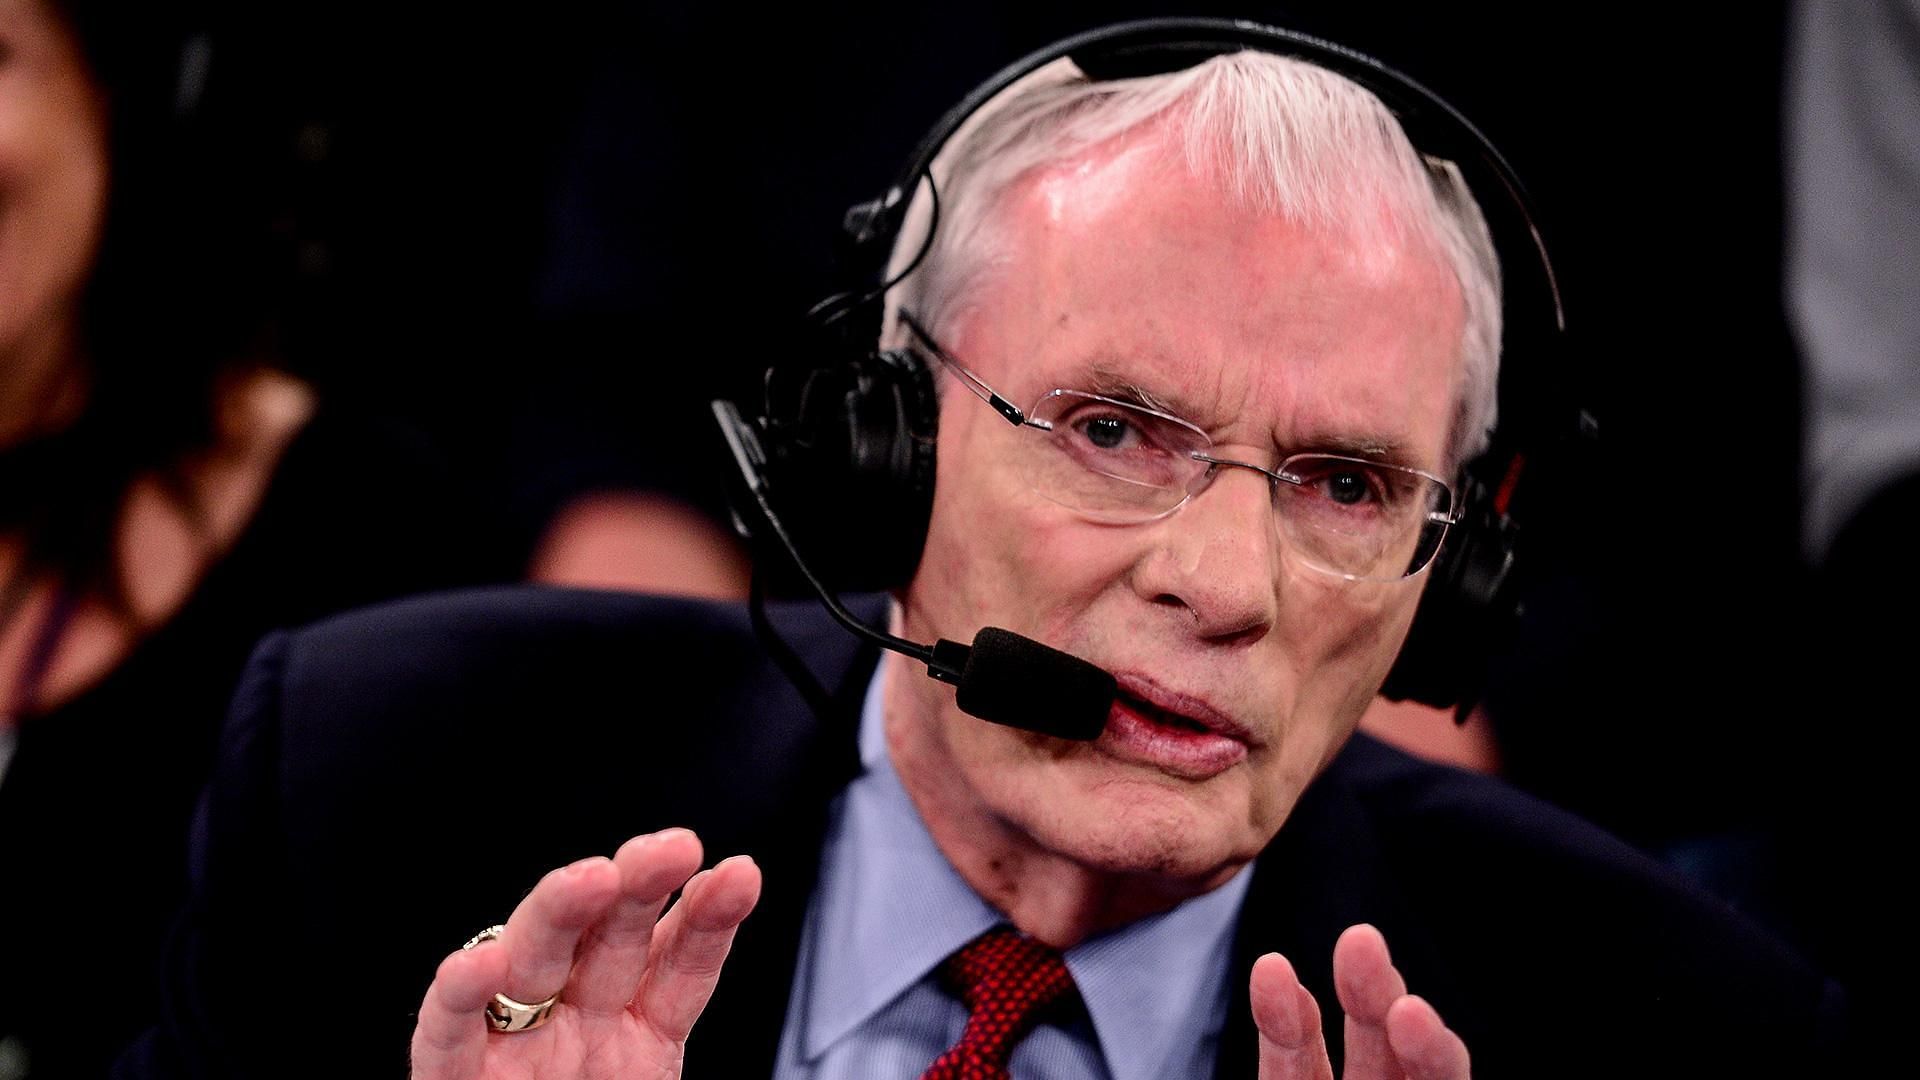 Hubie Brown to be retained by ESPN following their massive layoffs